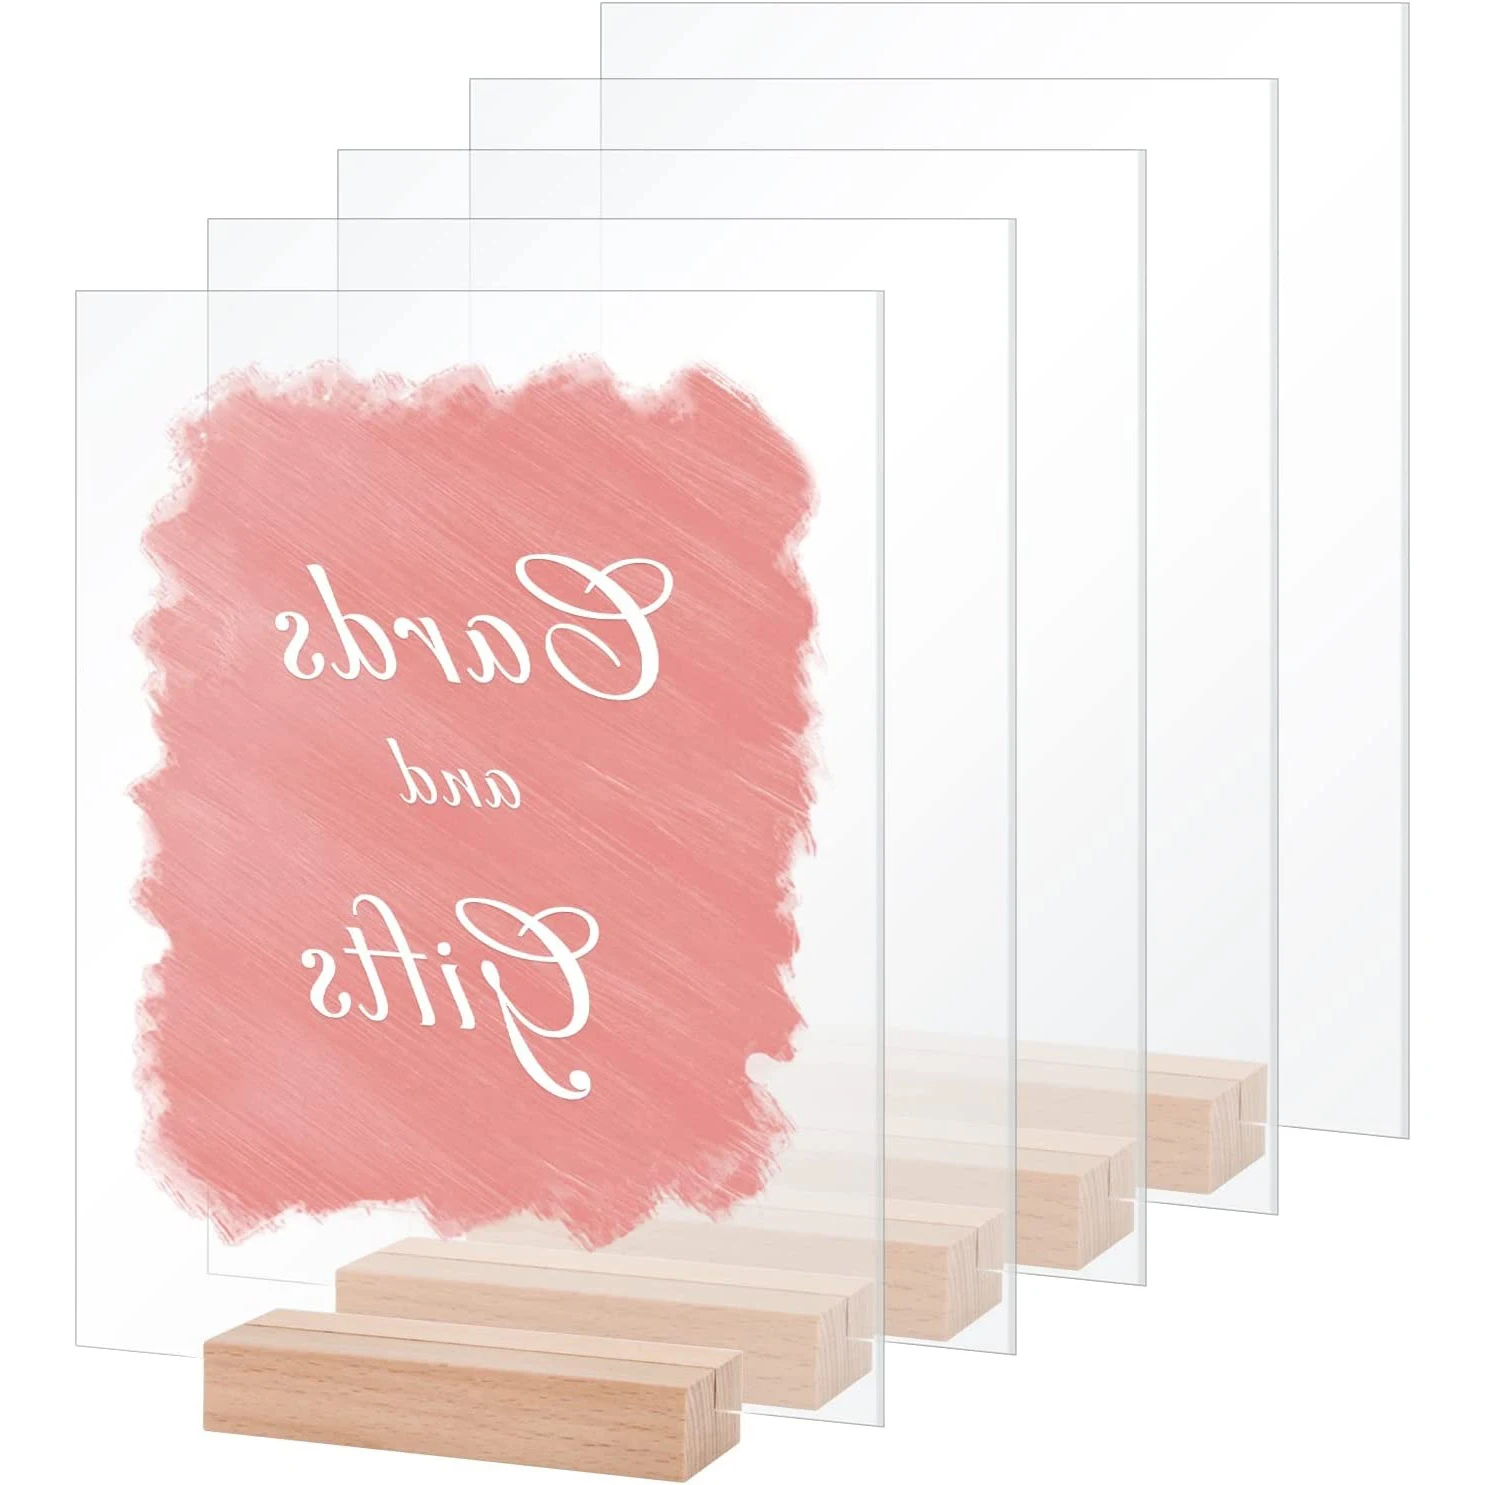 

Acrylic Stands Place Card Holders Rectangle Table Numbers Display Stands Sign for Wedding Table Number Photo Office Menu Meeting